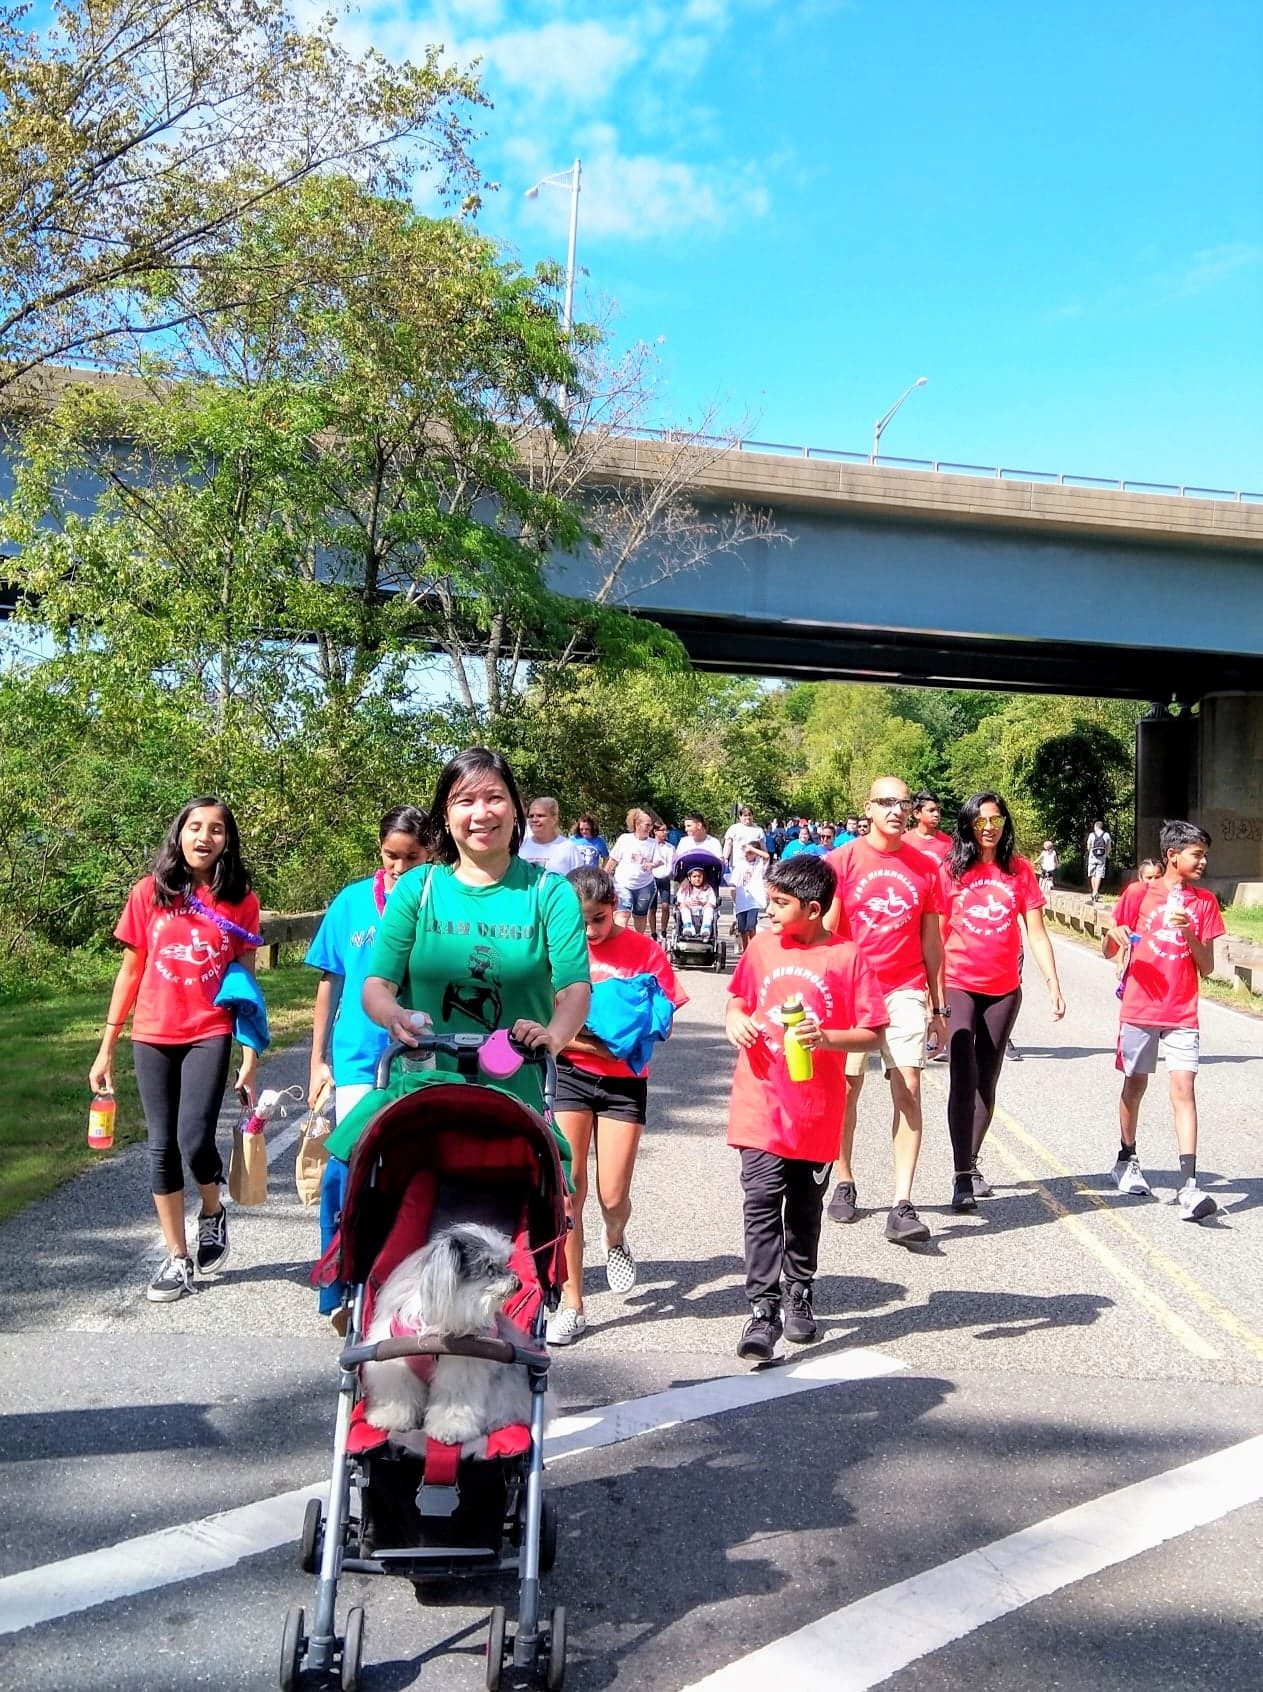 MEMBERS of Team Diego, with their mascot Tatiana the dog on board Diego’s stroller, finish the 5-kilometer Walk N’ Roll in New Jersery on September 15, 2019, in memory of Diego Lumauig. Photo by Georgina Lumauig 